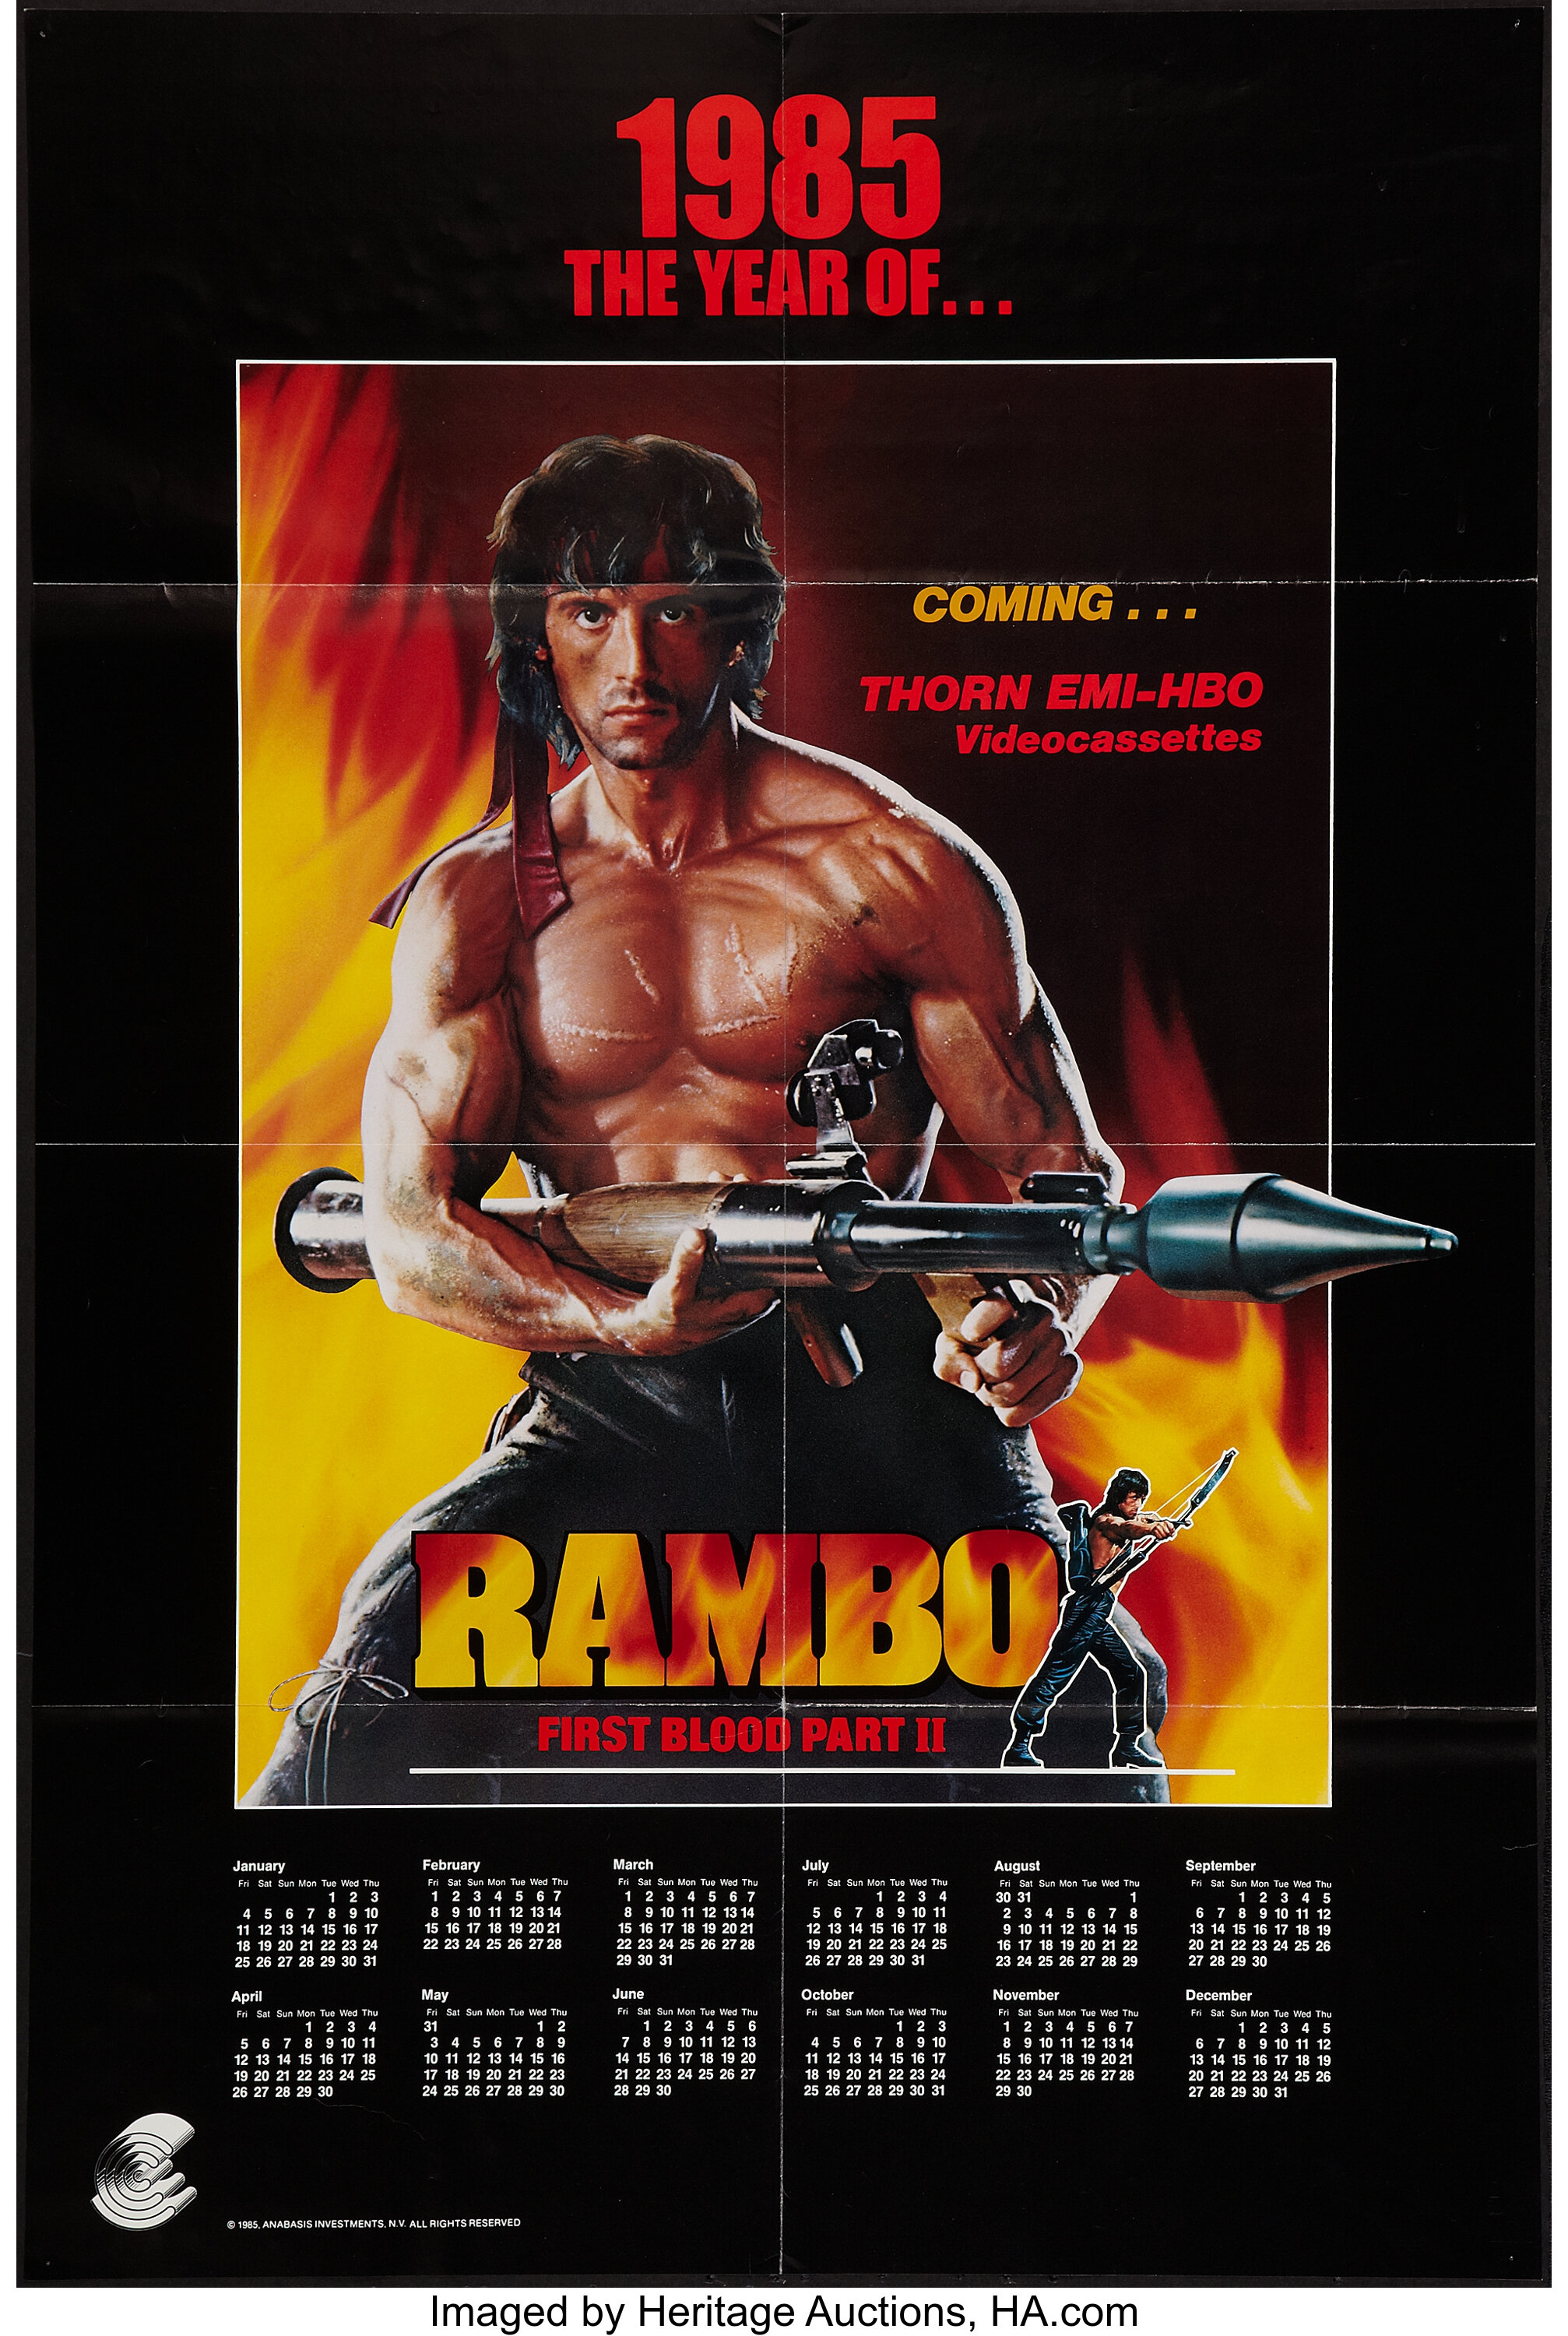 Rambo First Blood Part Ii Tri Star 1985 Video Calendar Poster Lot Heritage Auctions